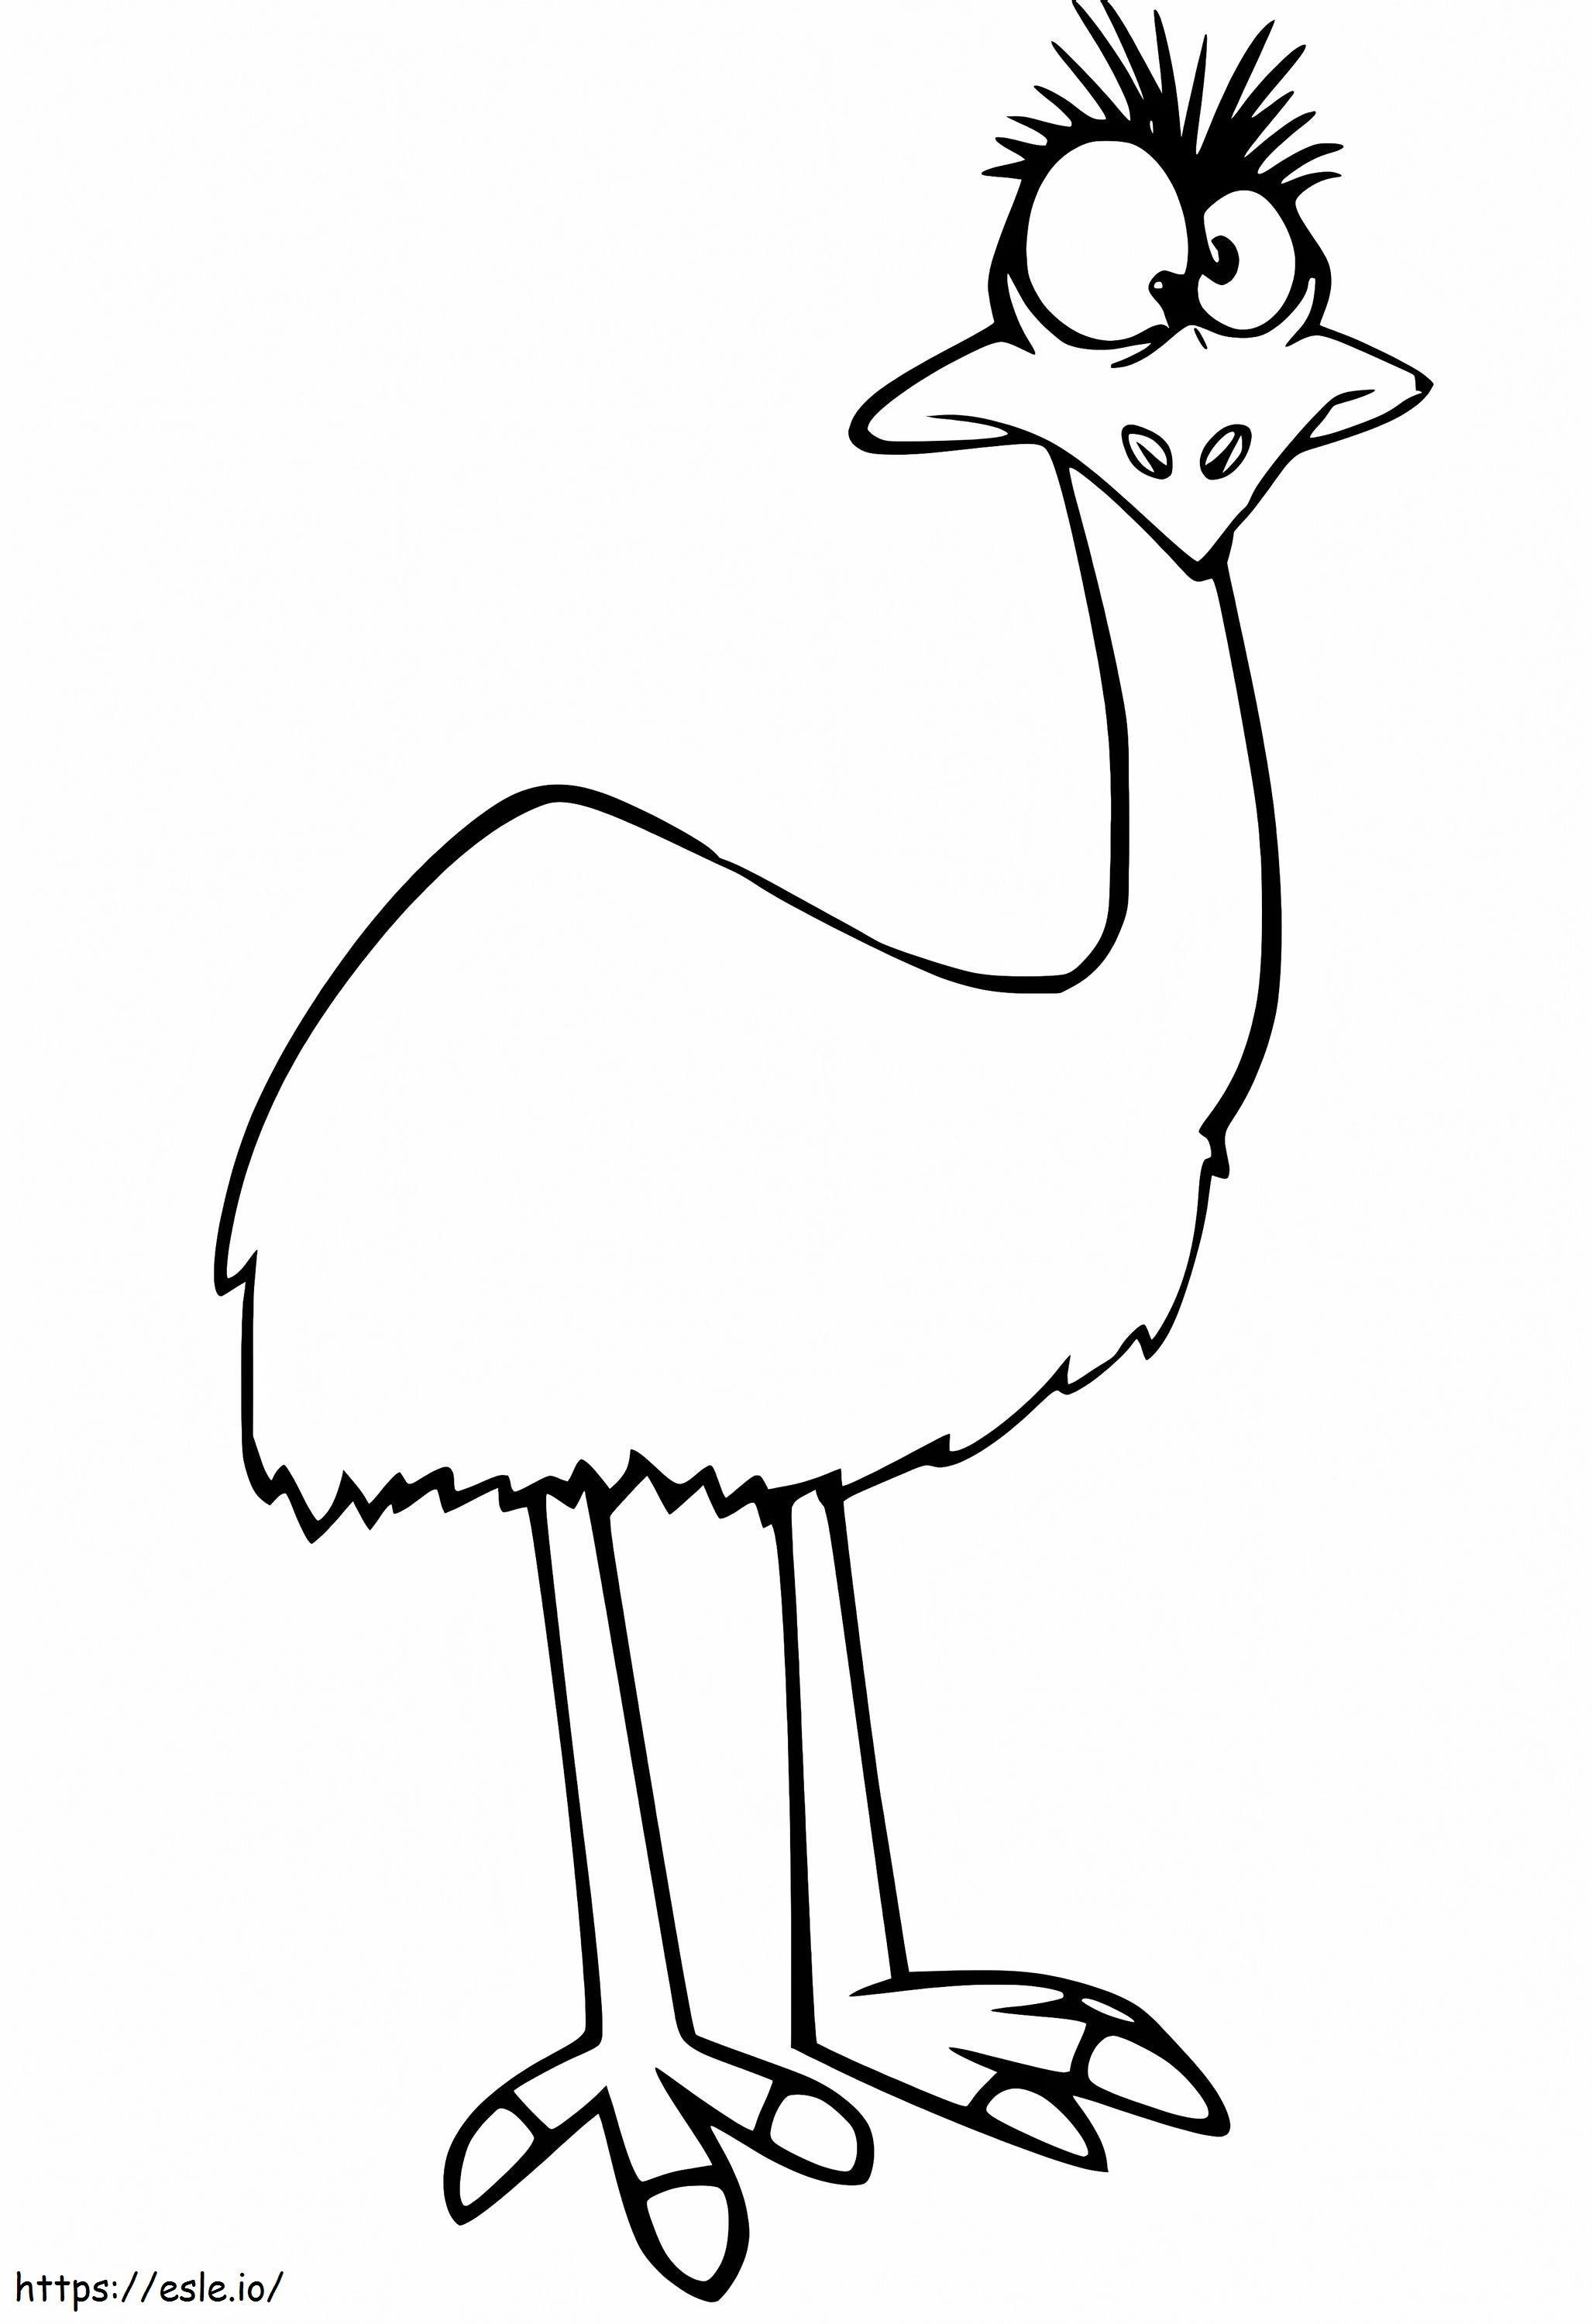 Crazy Emu coloring page